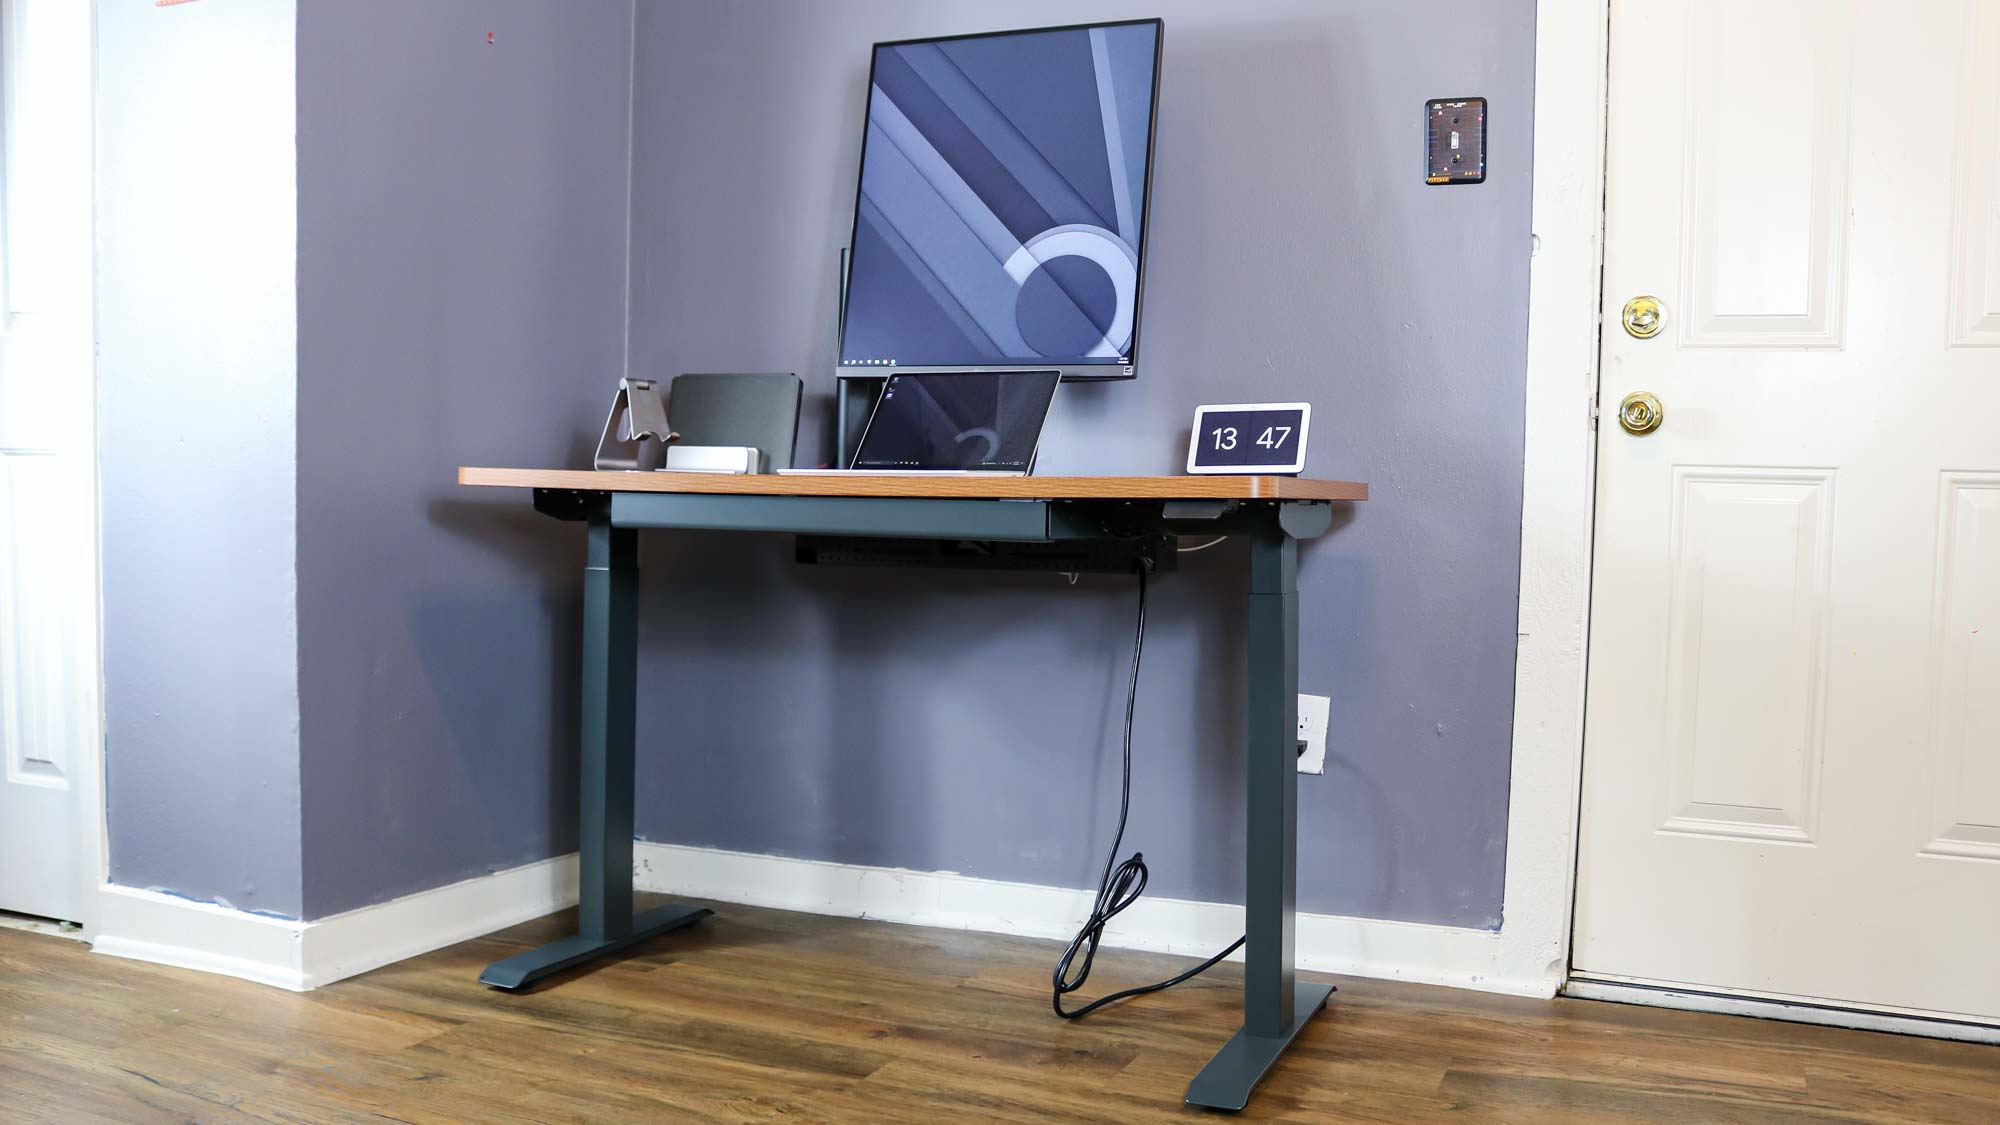 The Branch Duo Standing Desk outfitted with a monitor, laptop and smart display